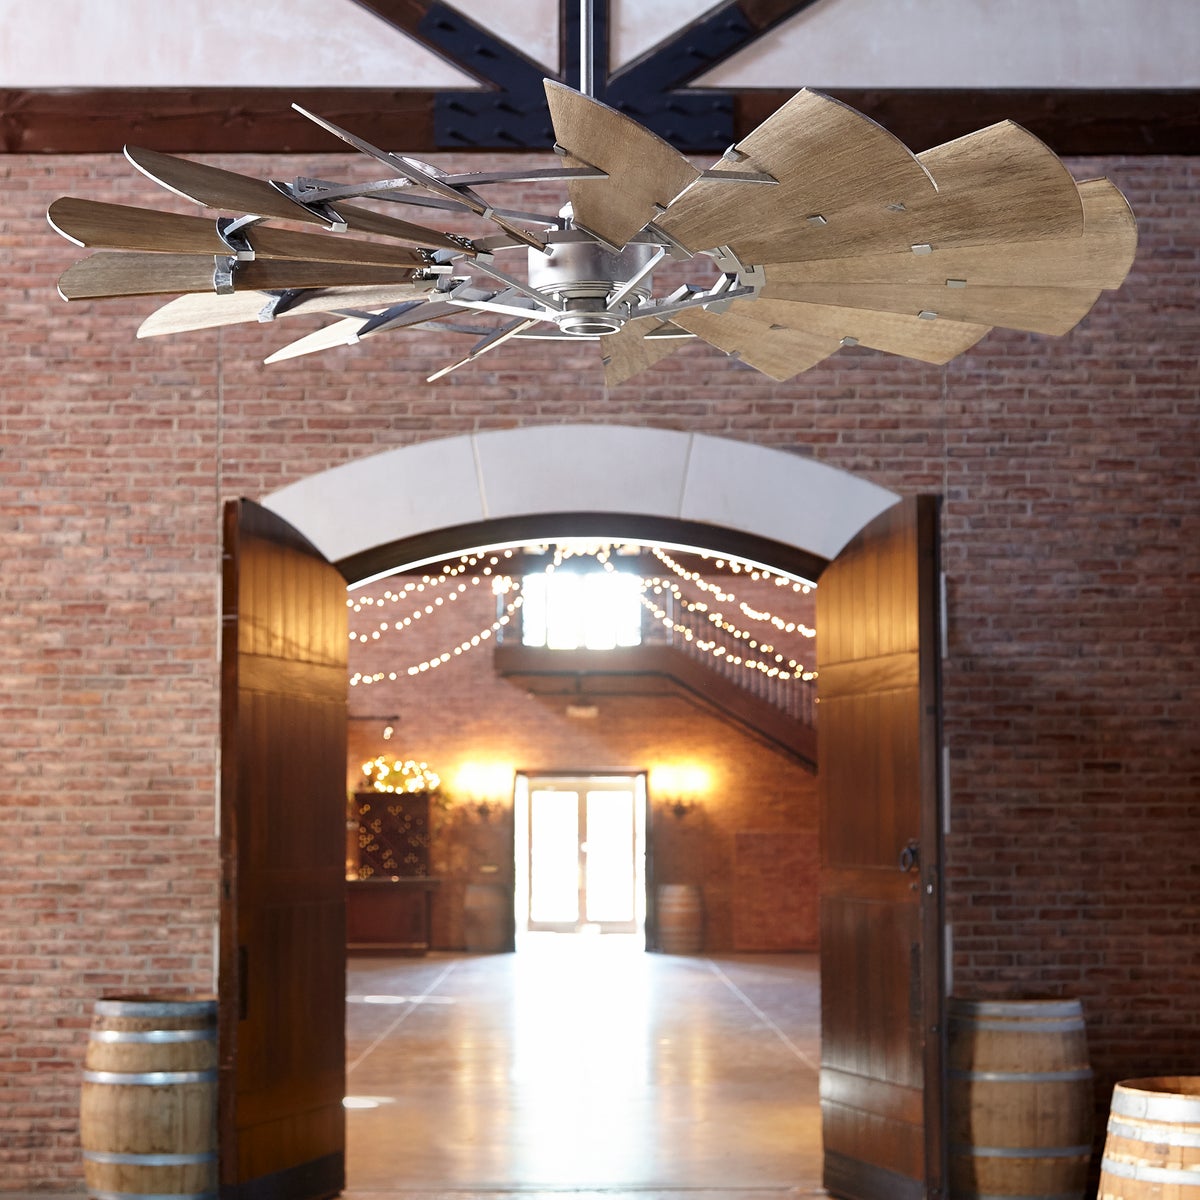 Alt text: "Farmhouse Ceiling Fan with 15 weathered oak wooden blades, rustic design, and a windmill-inspired look. Quorum International DC-165L motor, UL Listed, dry location. Dimensions: 16.5"H x 72"W."